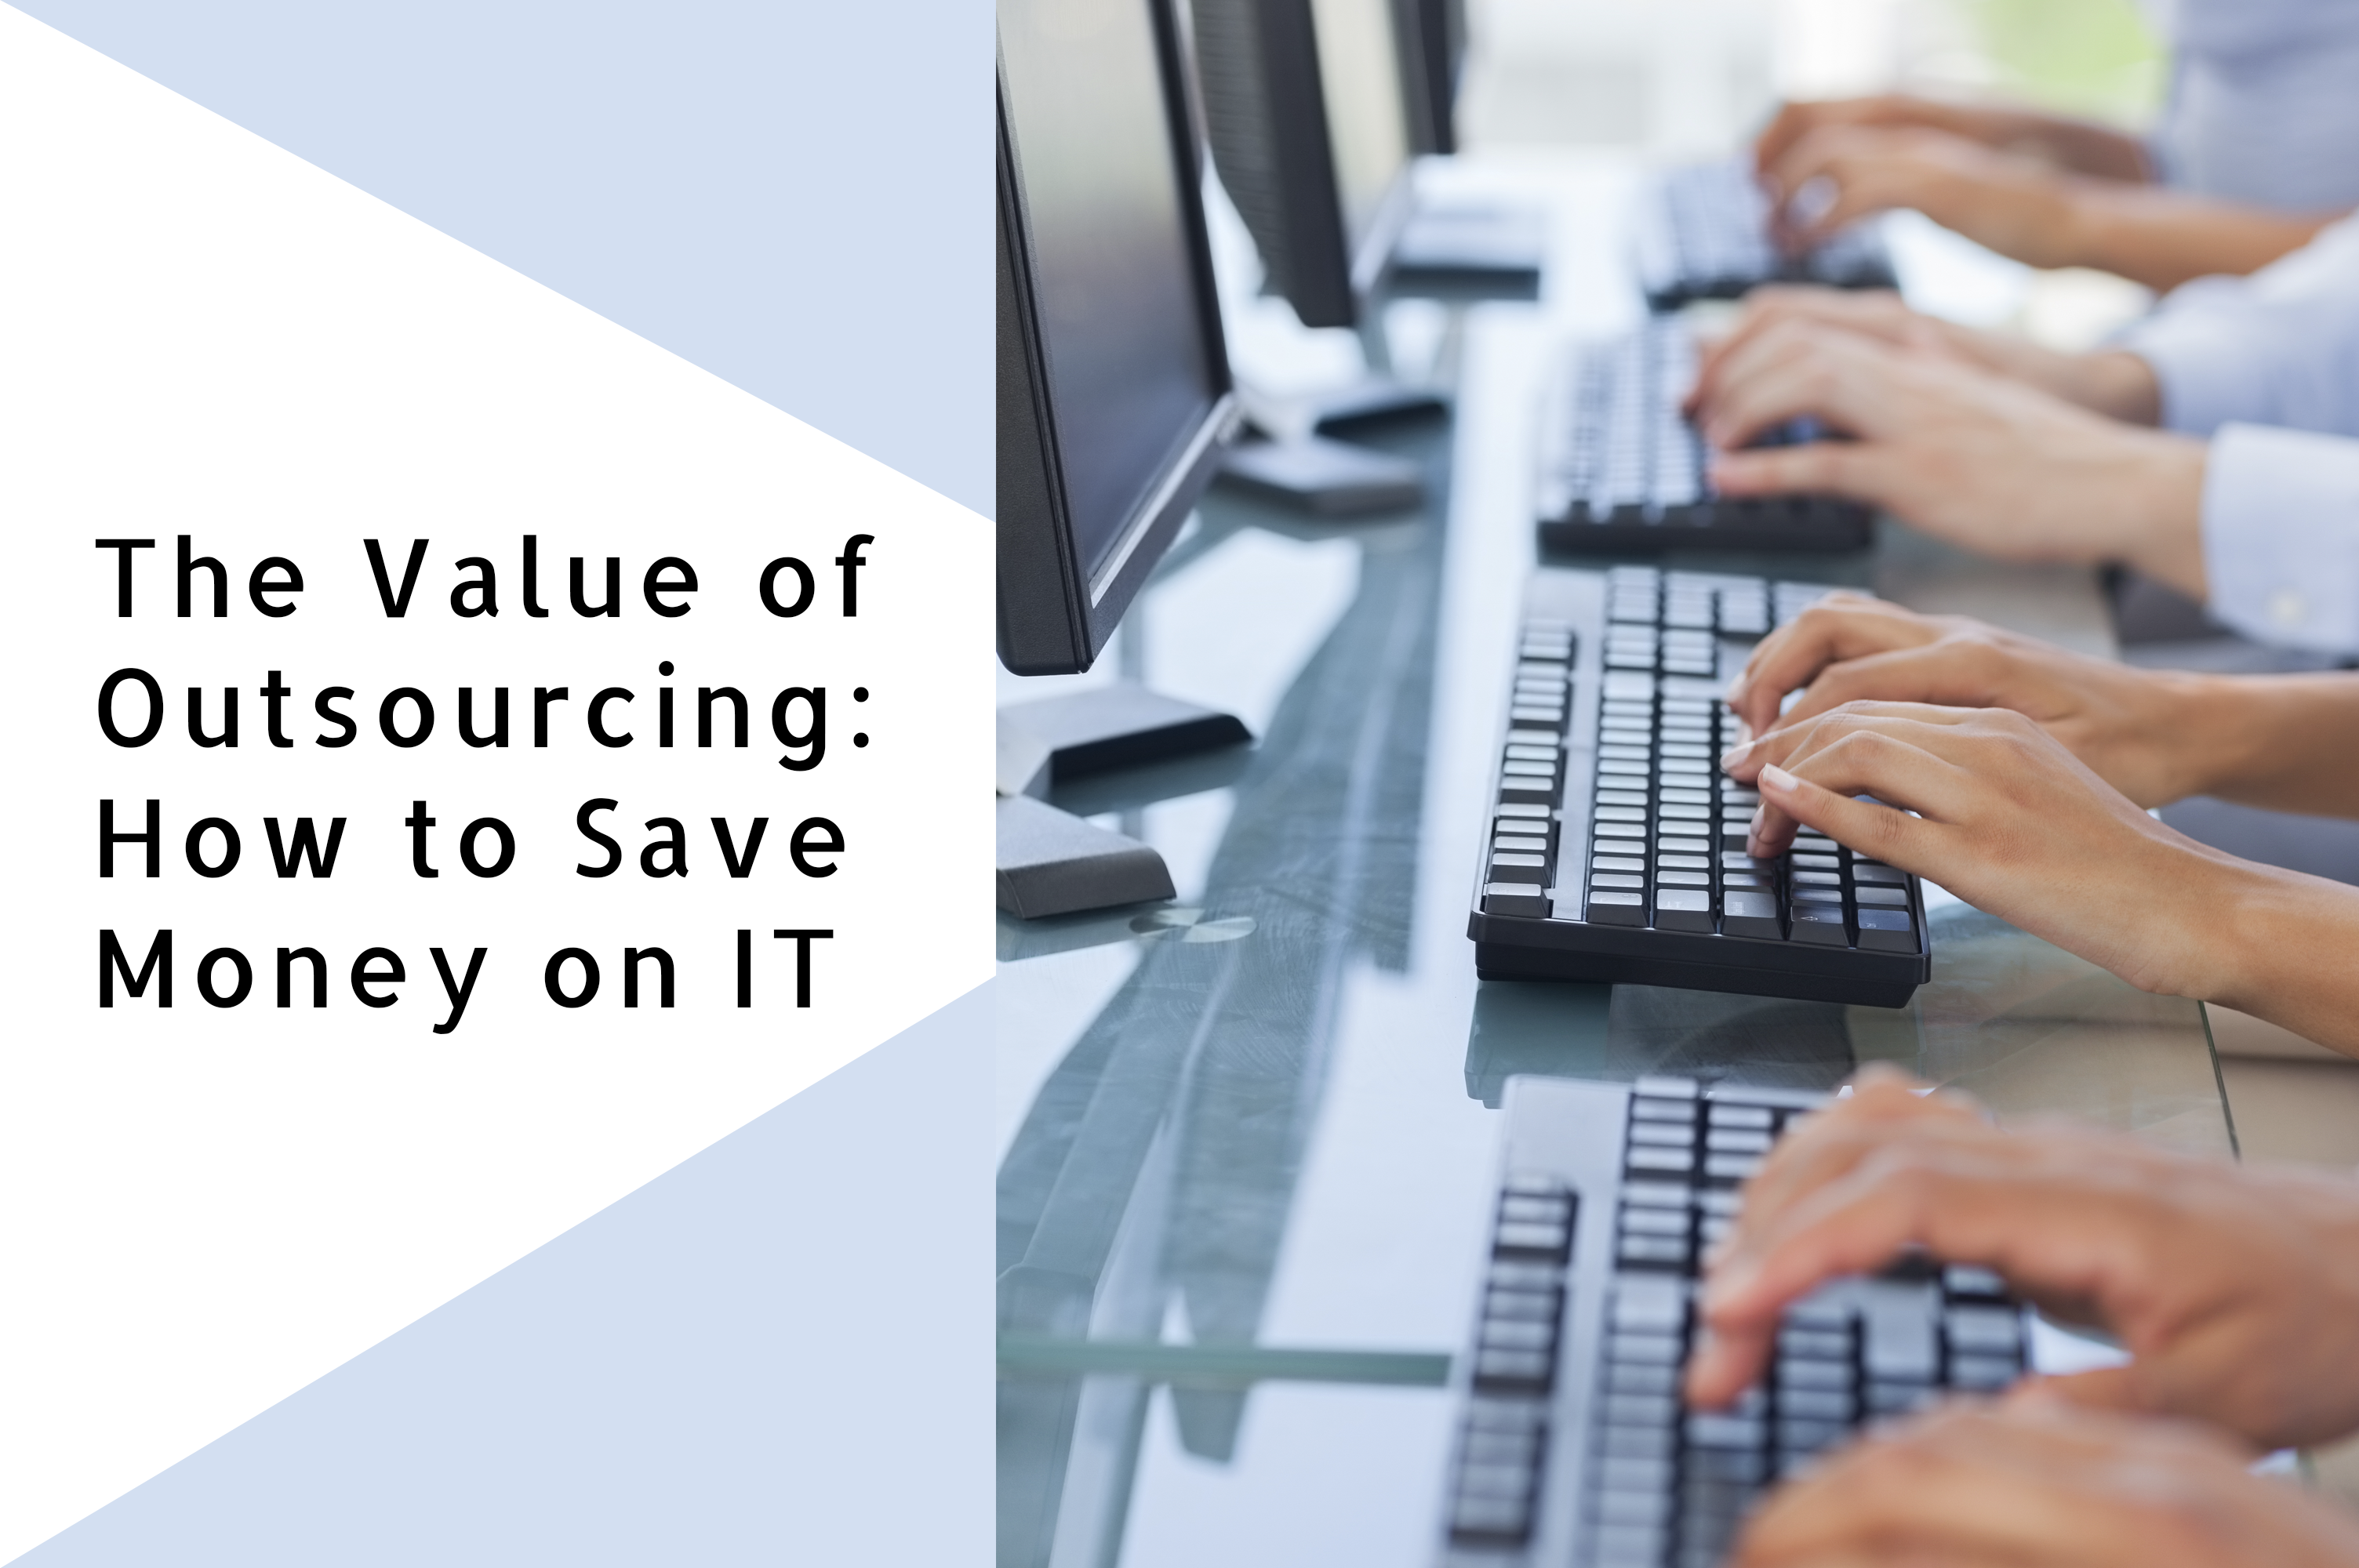 The Value of Outsourcing: How to Save Money on IT